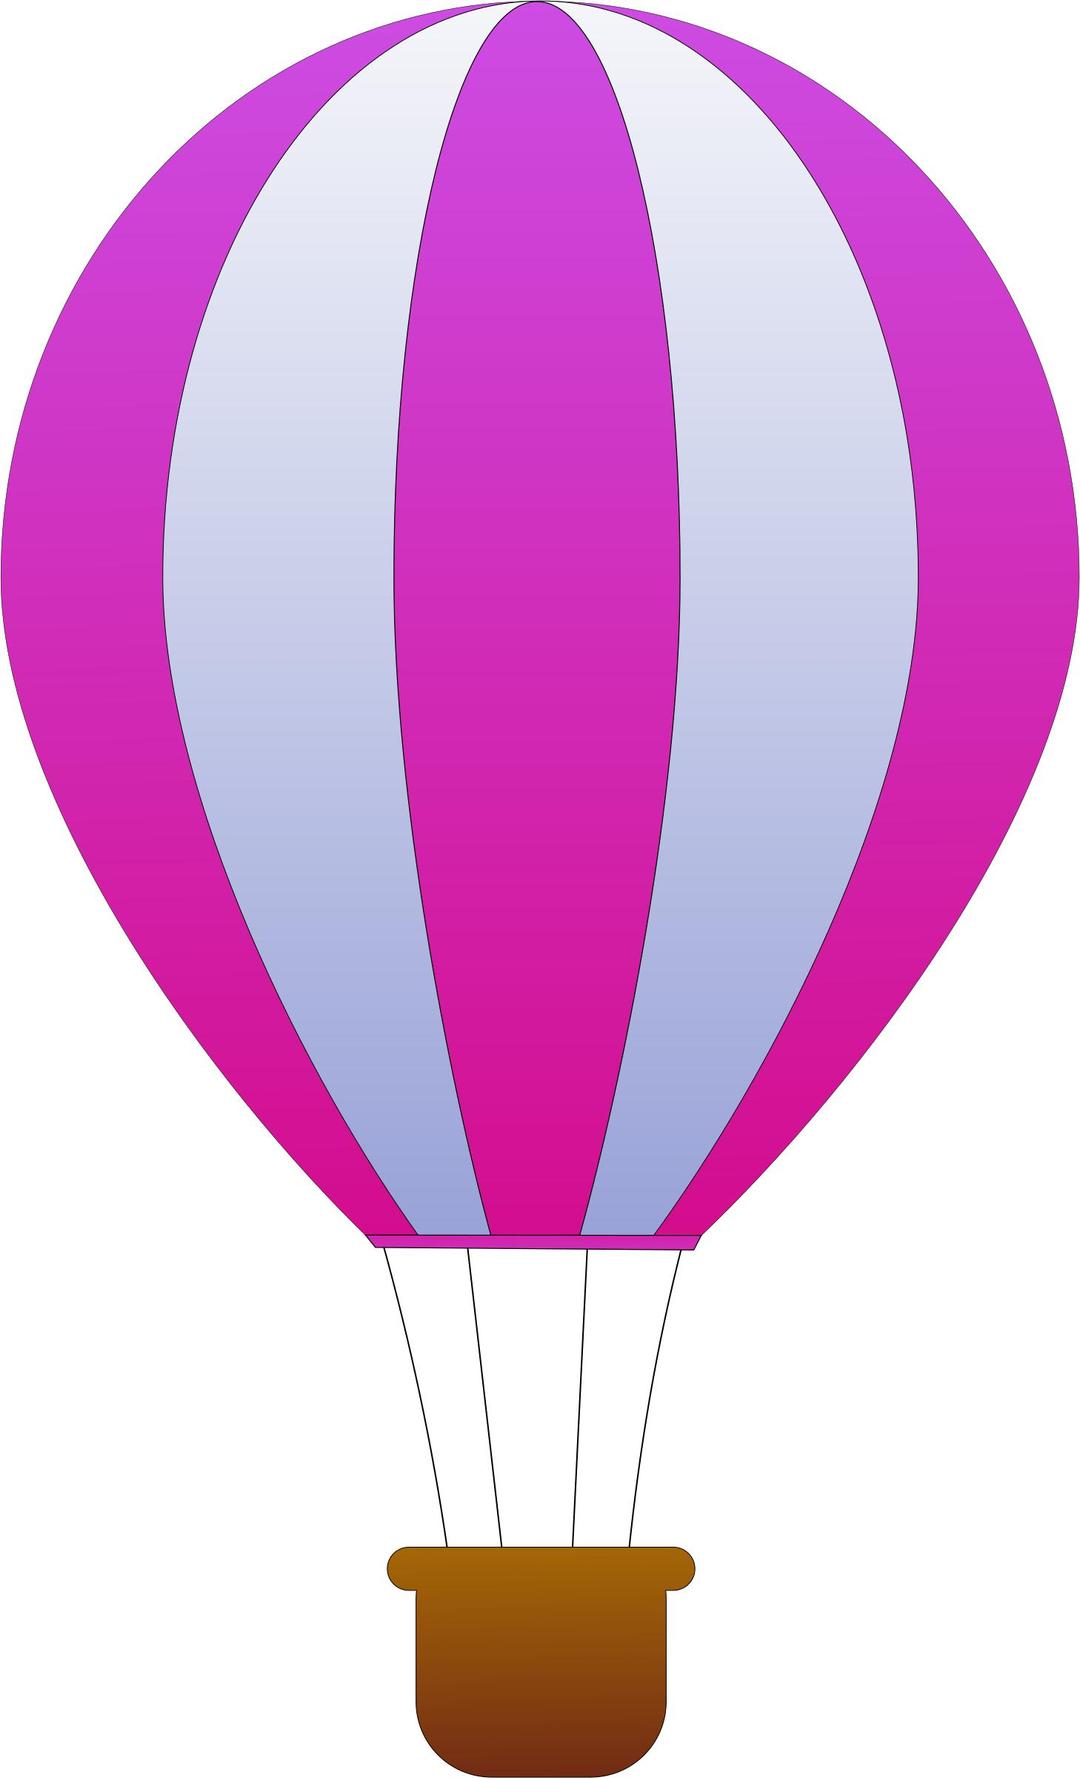 Vertical Striped Hot Air Balloons 3 png transparent